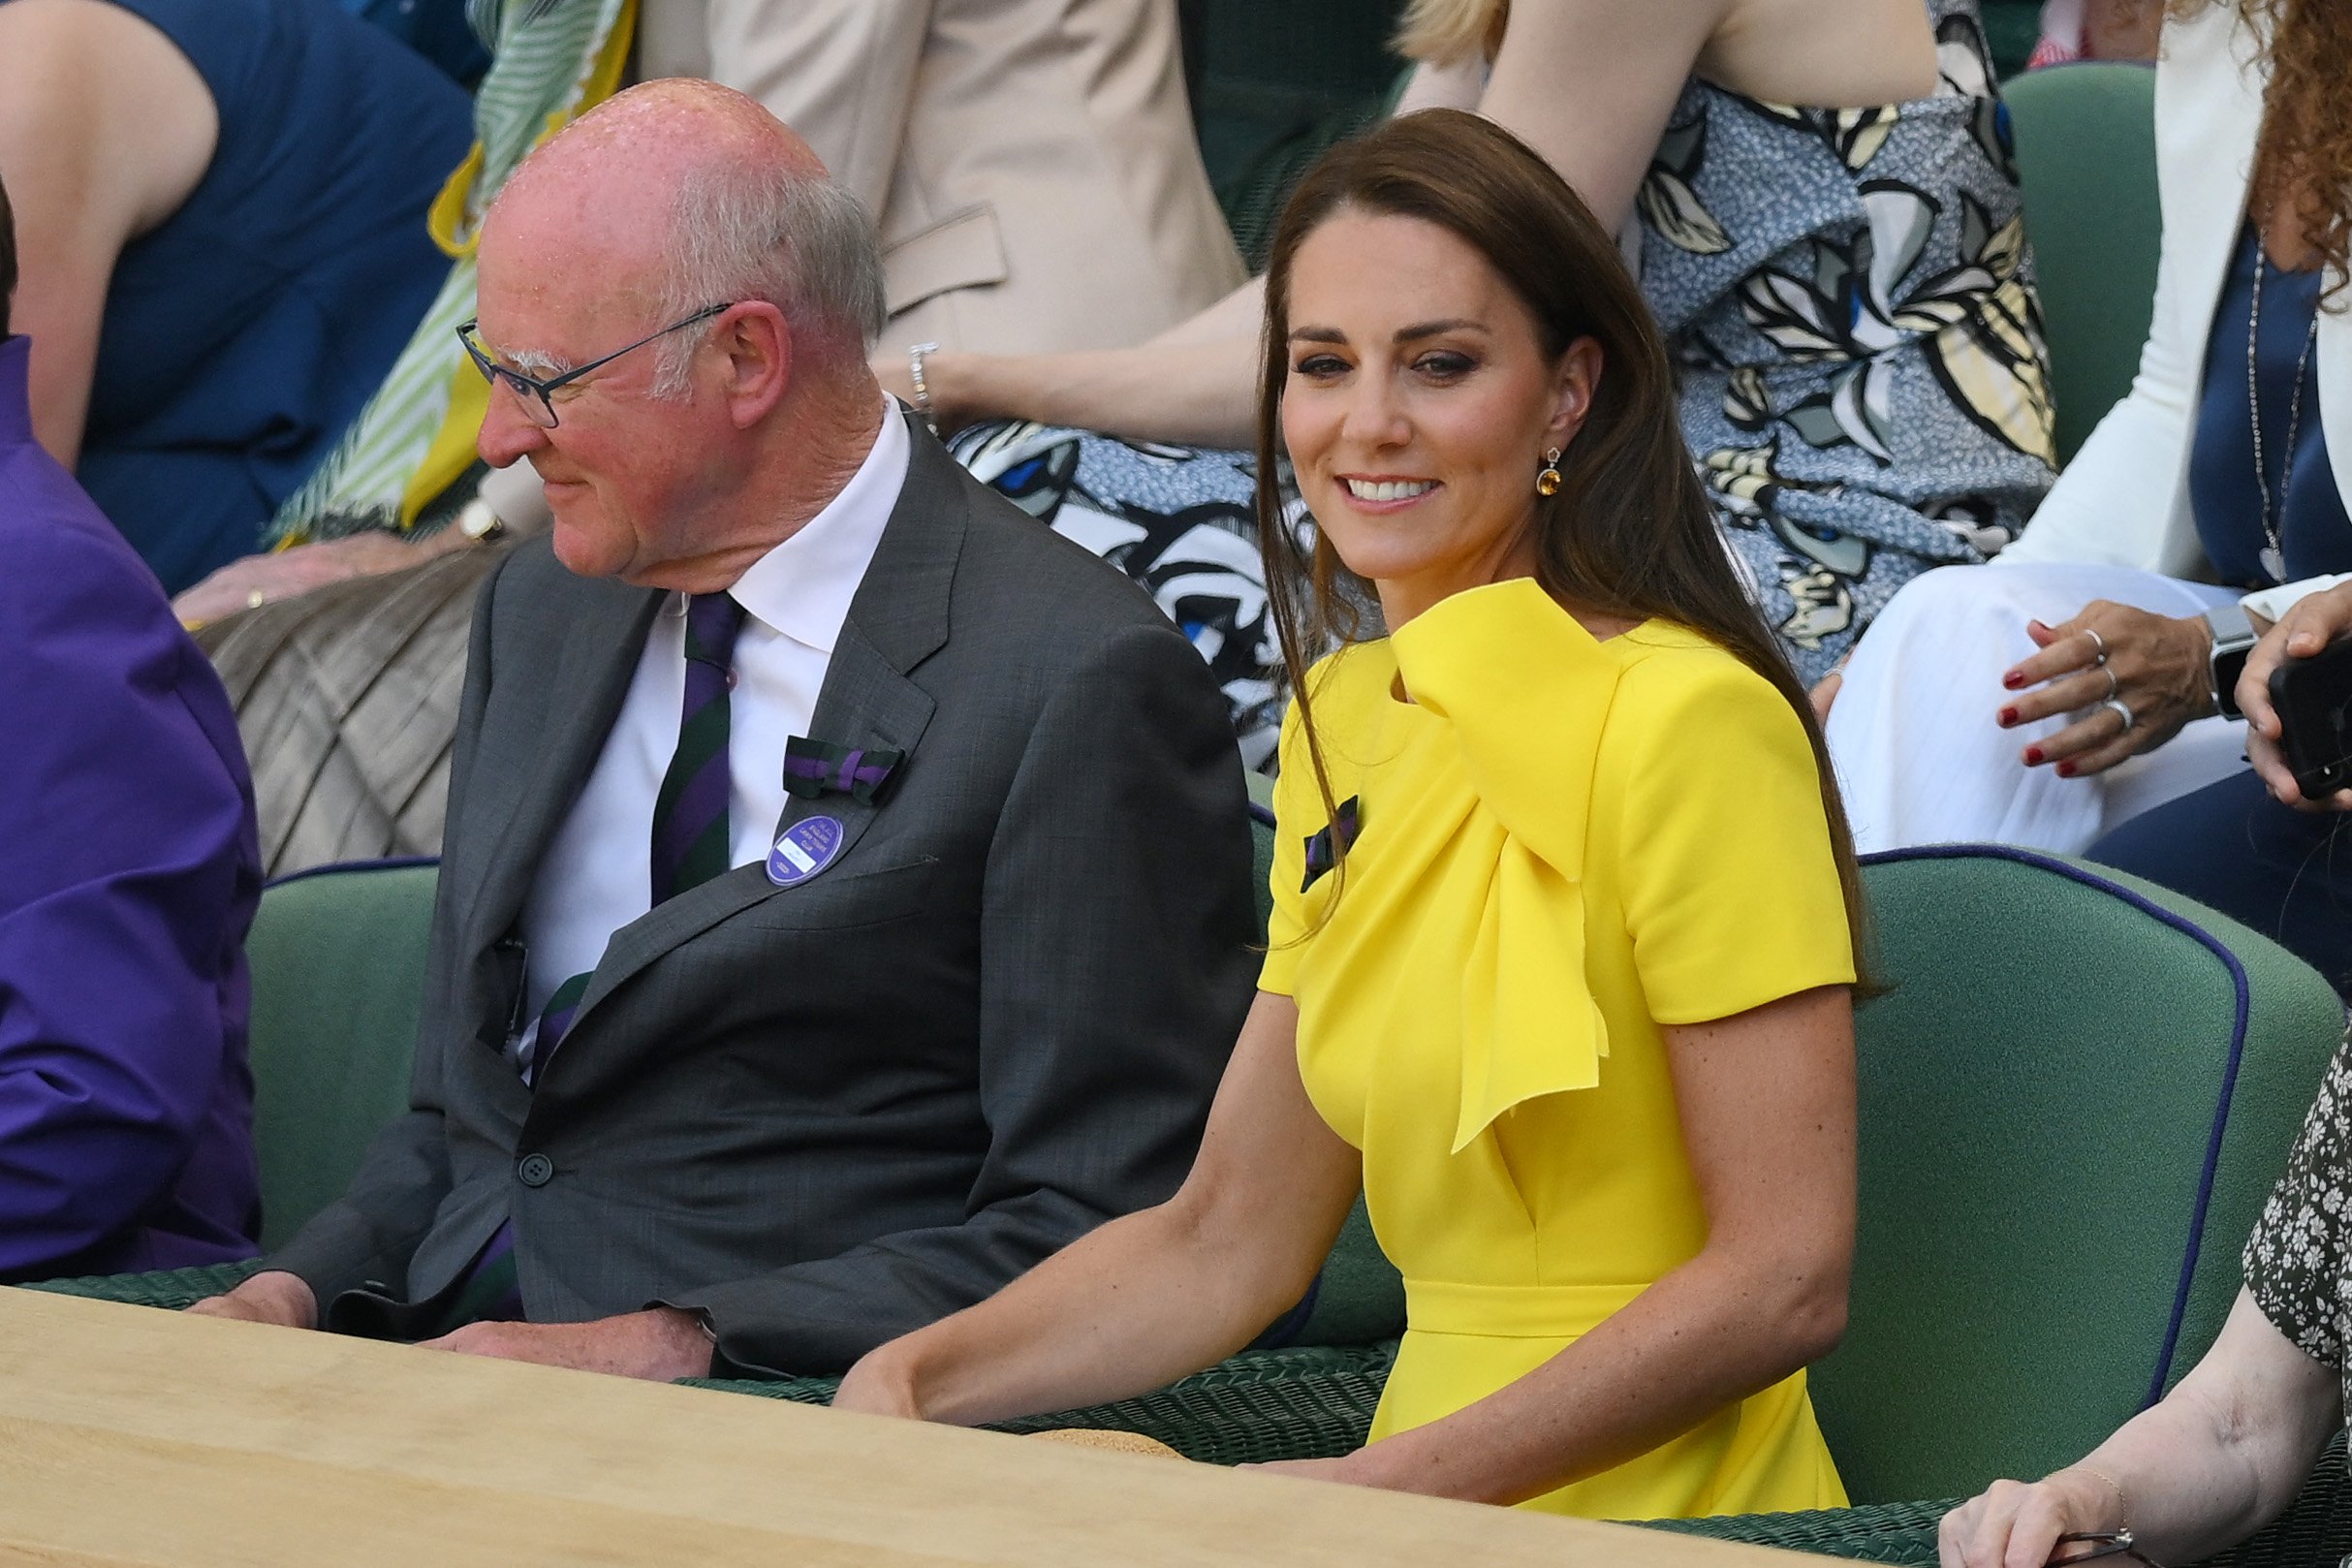 Kate Middleton at the Women's SIngles Finals at Wimbledon in London, 2022 | Source: Getty Images